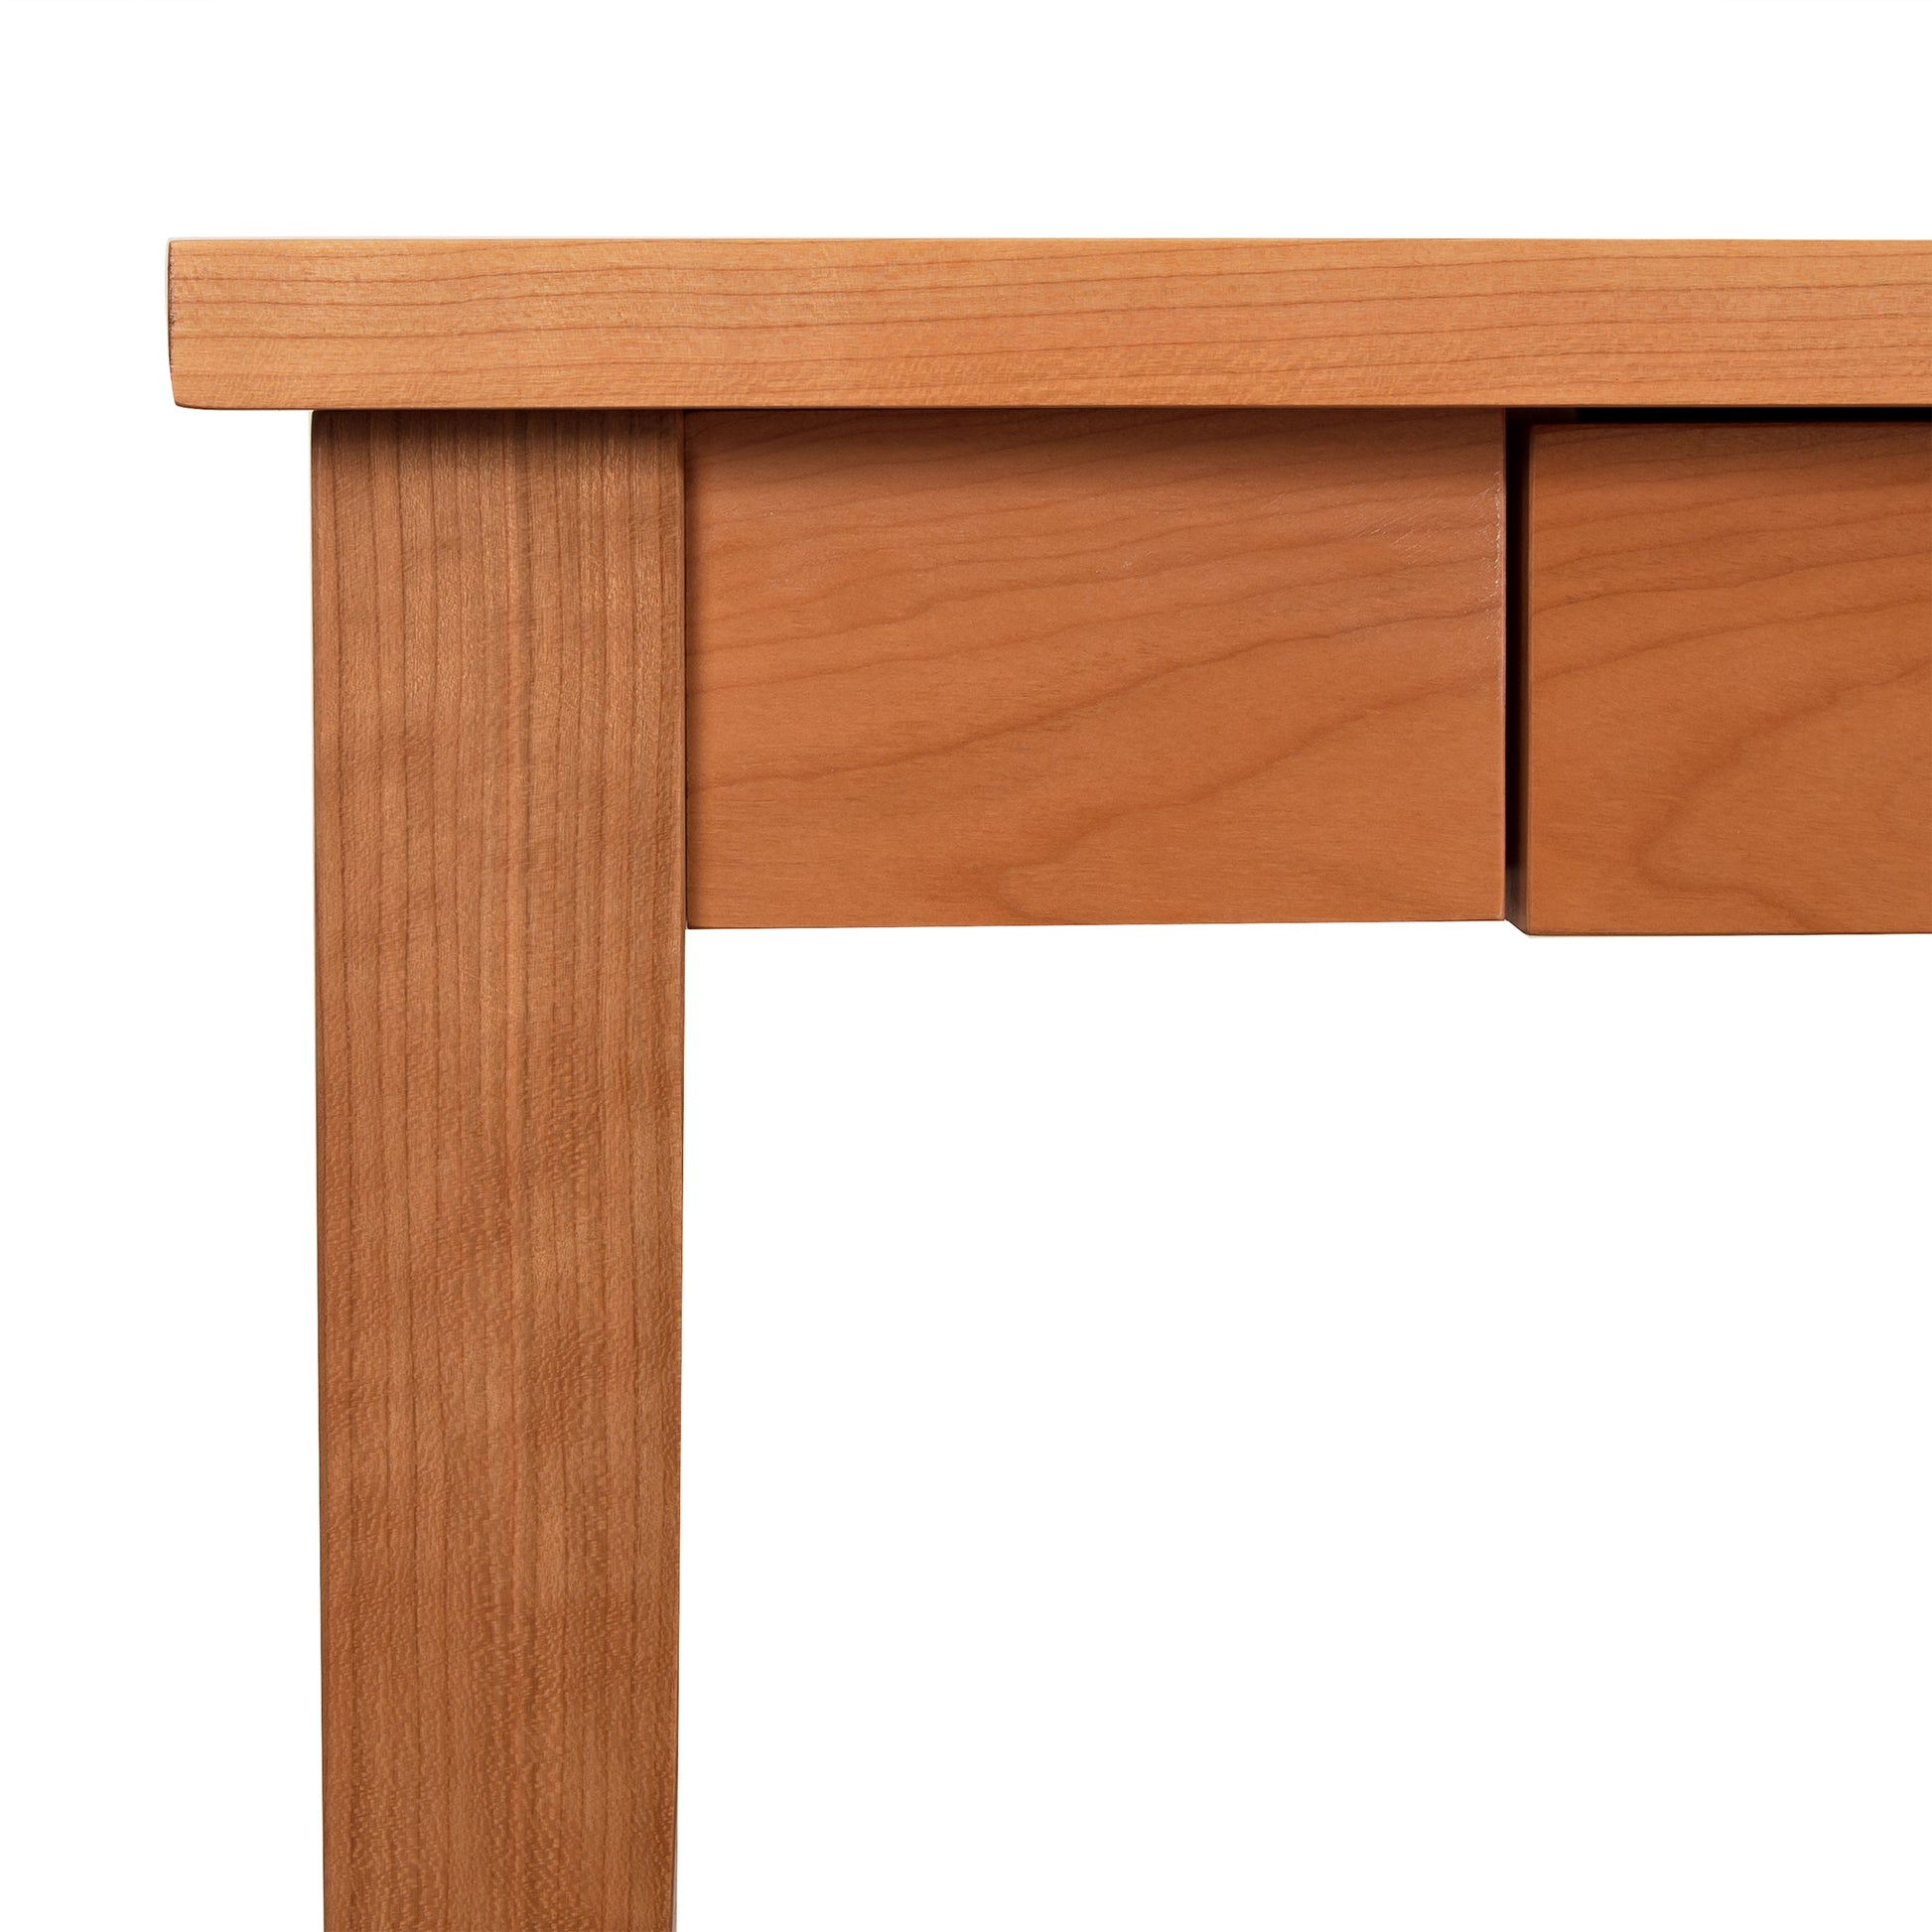 Close-up of a Lyndon Furniture Classic Shaker Writing Desk corner showing clean, straight edges and seamless joints, highlighting the smooth texture and natural grain of the wood.